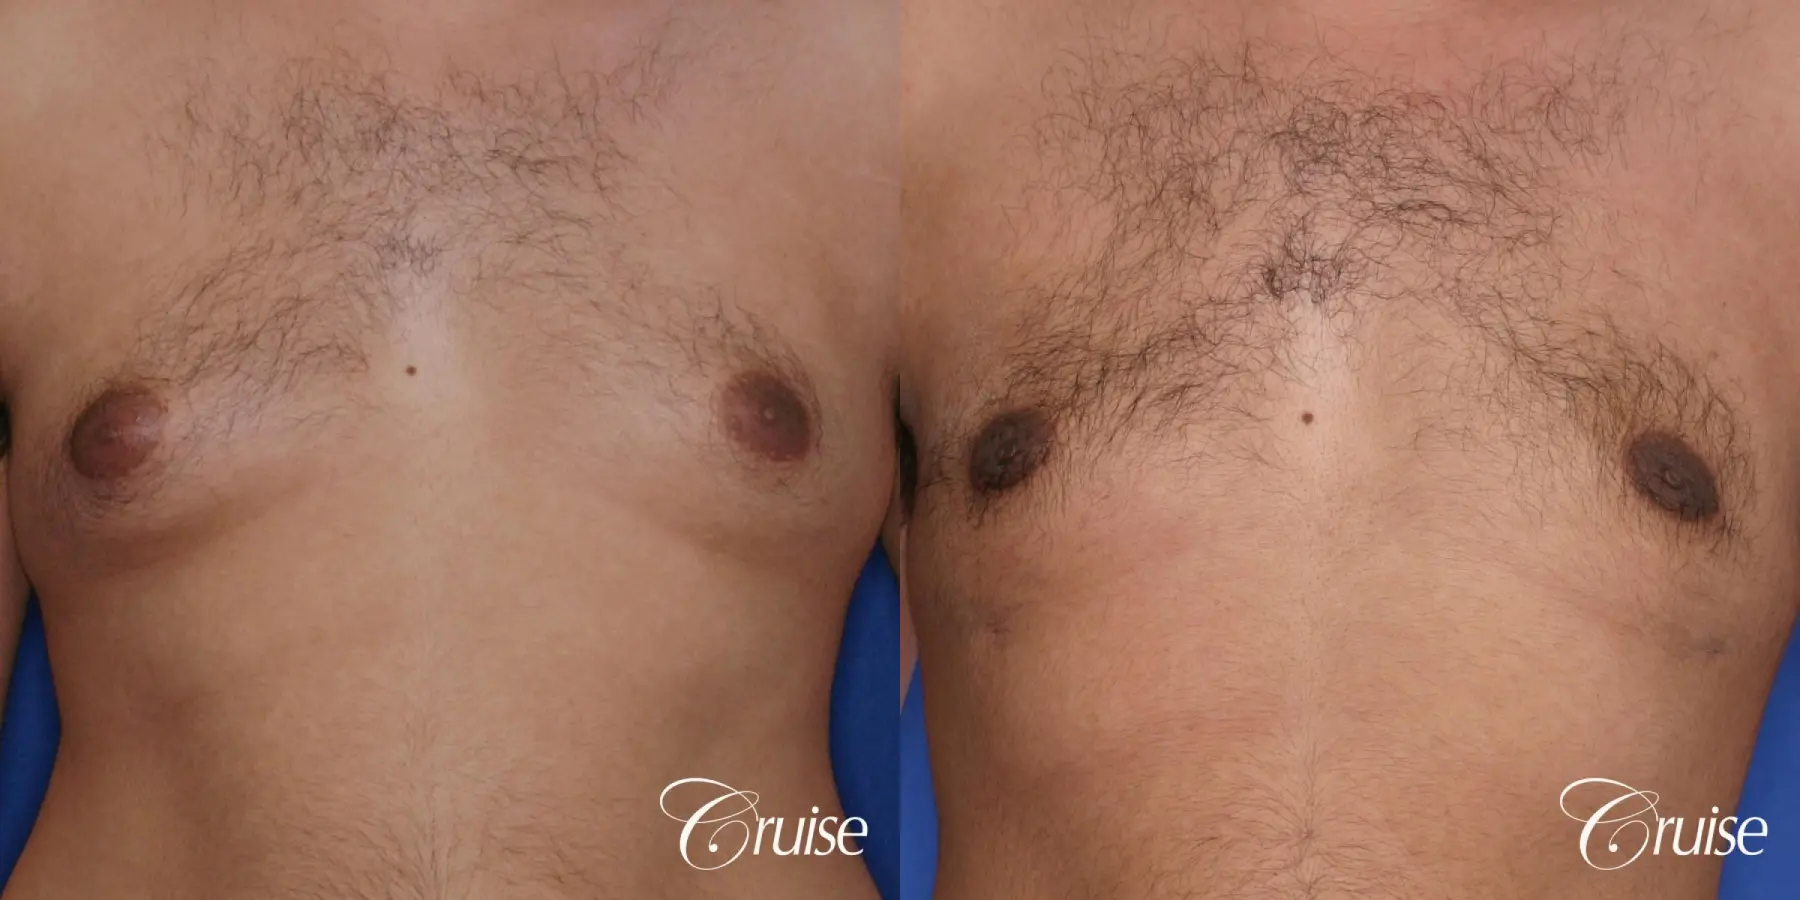 best scar on 32 gynecomastia patient - Before and After 1